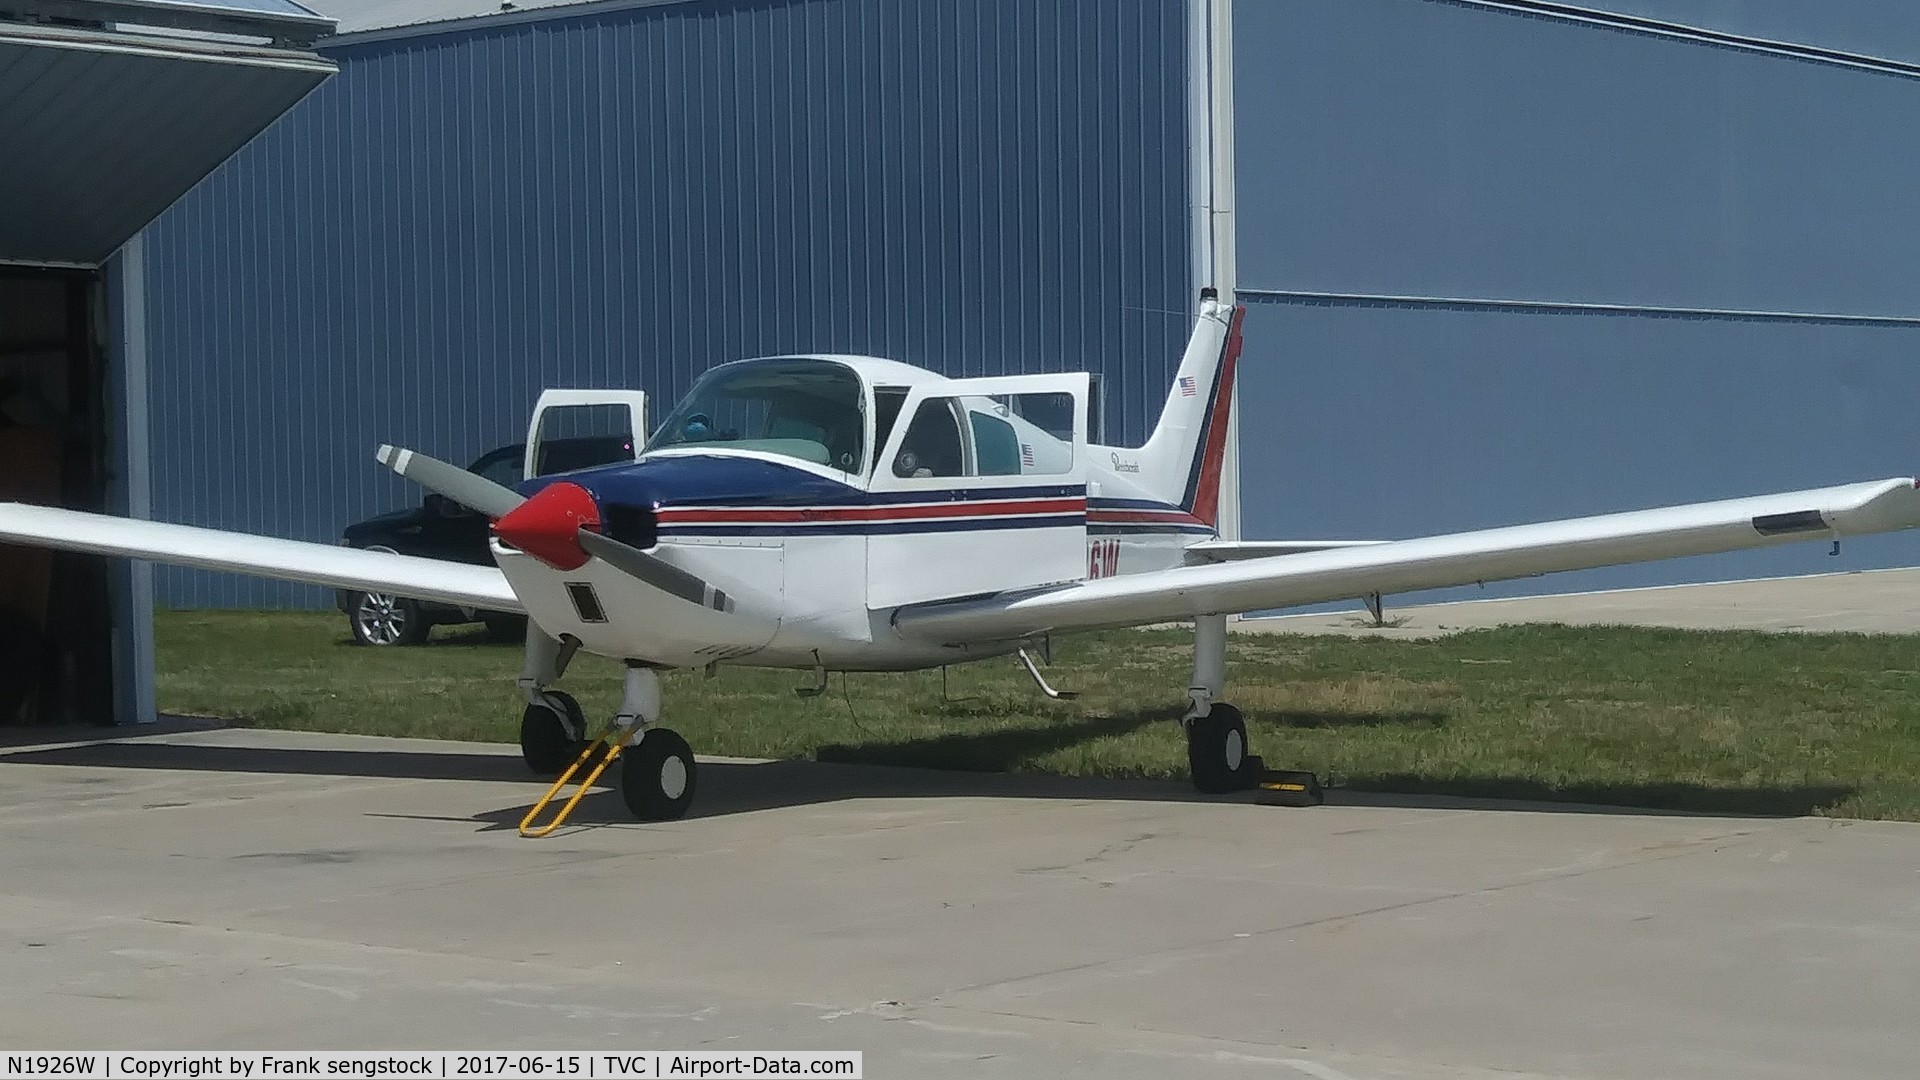 N1926W, 1973 Beech B19 Sport 150 C/N MB-587, Just brought home